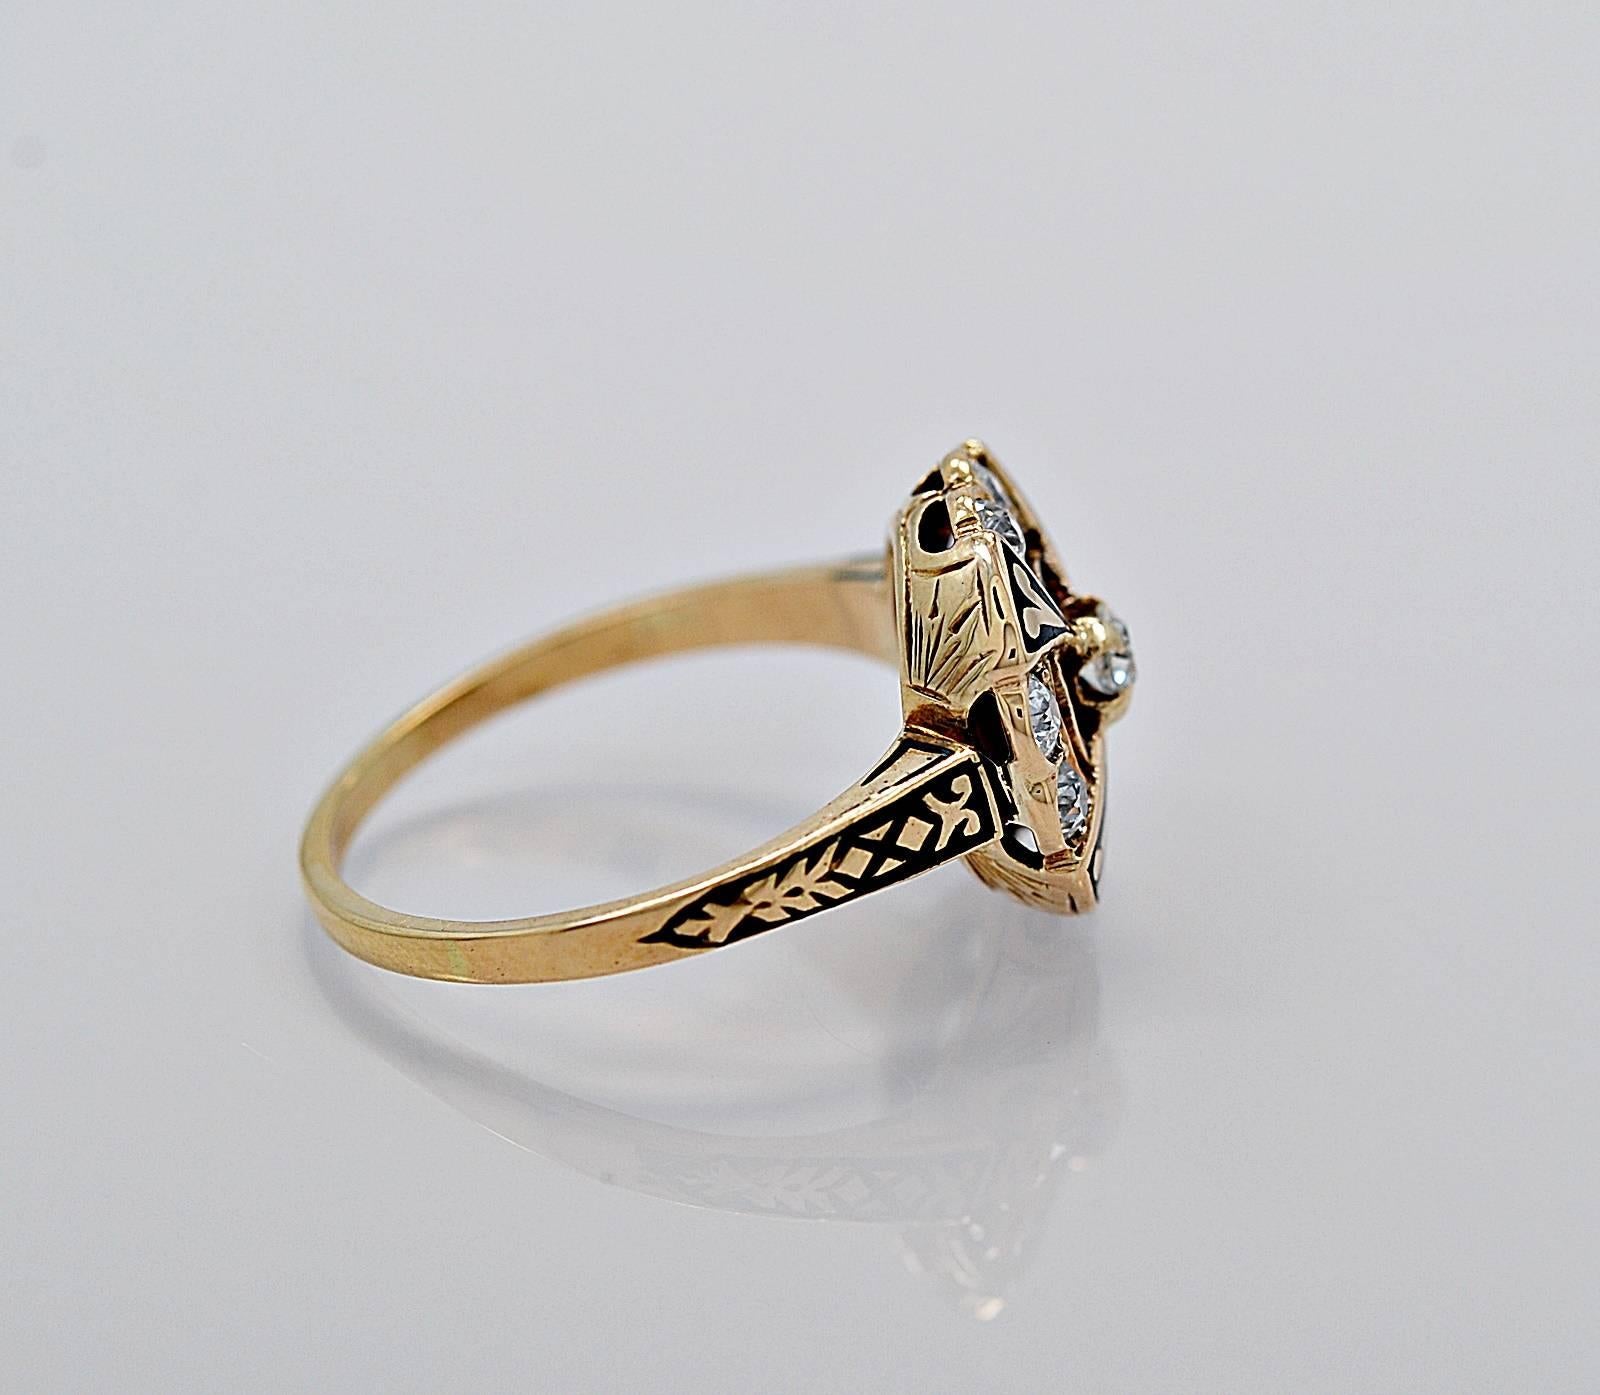 A unique antique engagement ring or fashion ring crafted in 14K yellow gold with enamel accents. This ring features a .10ct. apx. European cut center diamond that is surrounded by .50ct. apx. T.W. of exceptional quality diamonds with VS2-SI1 clarity